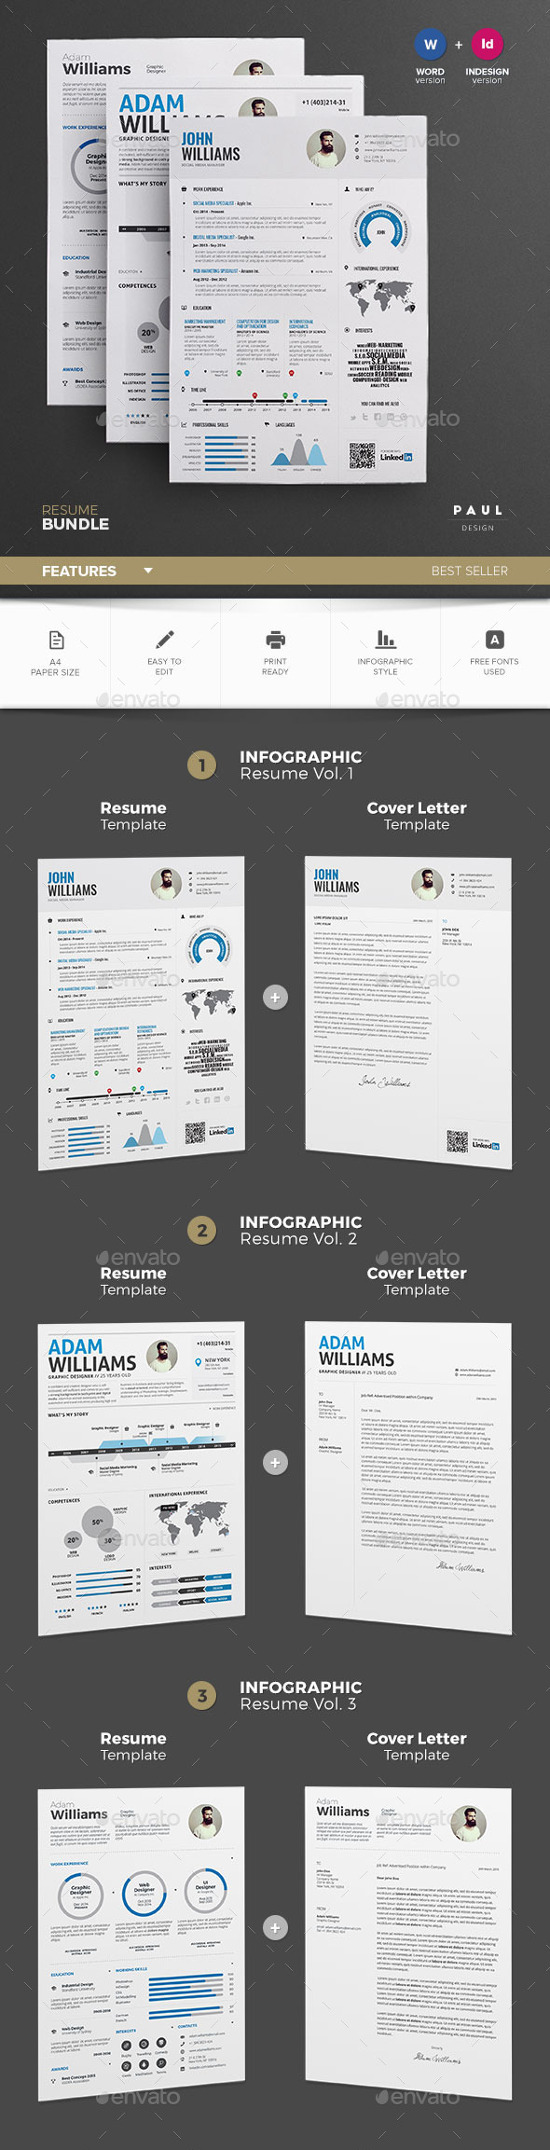 best infographic resume templates for you